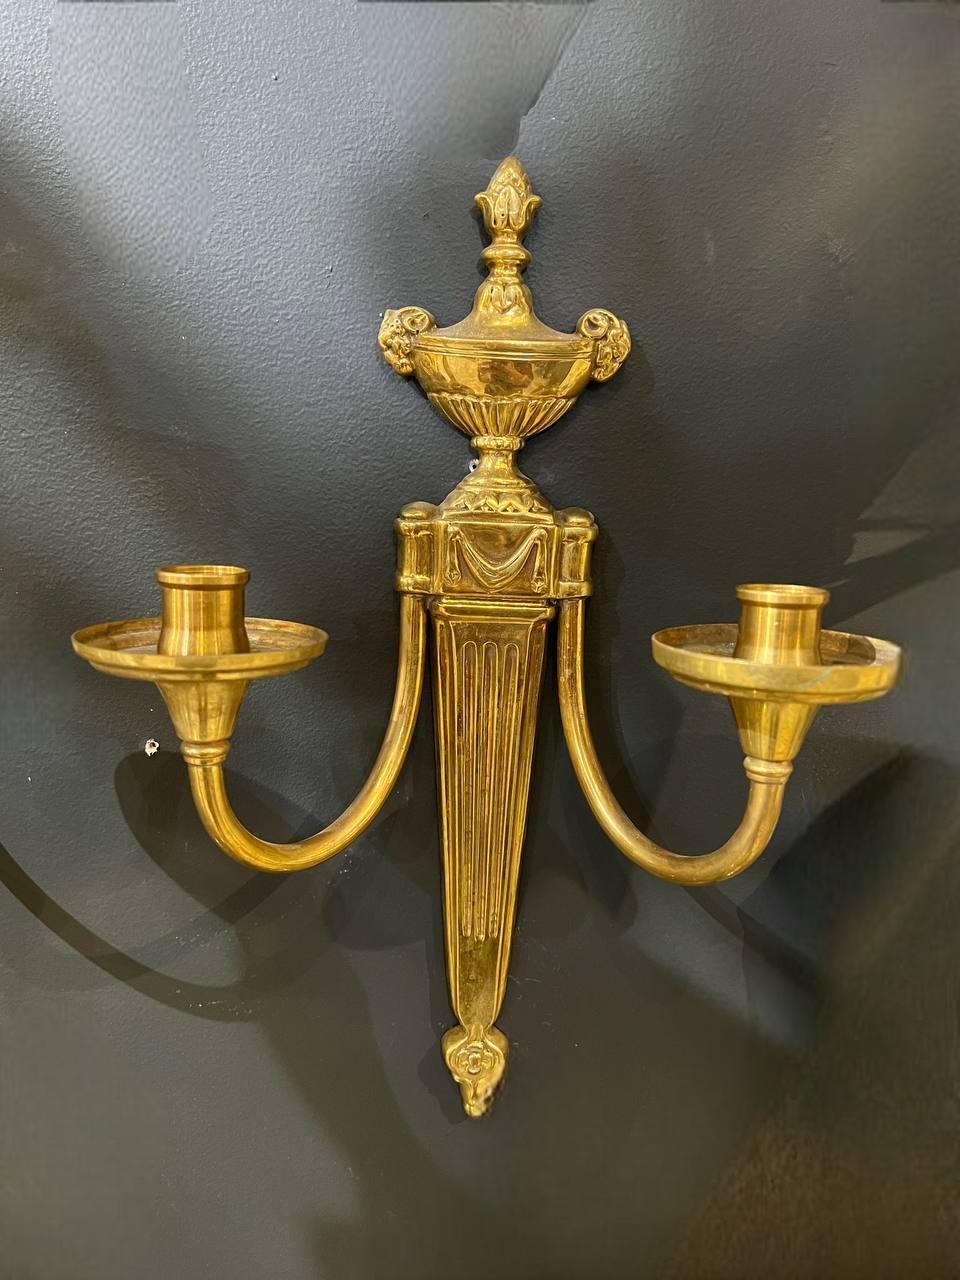 A circa 1920's Caldwell gilt bronze sconces with Rams Heads and two lights